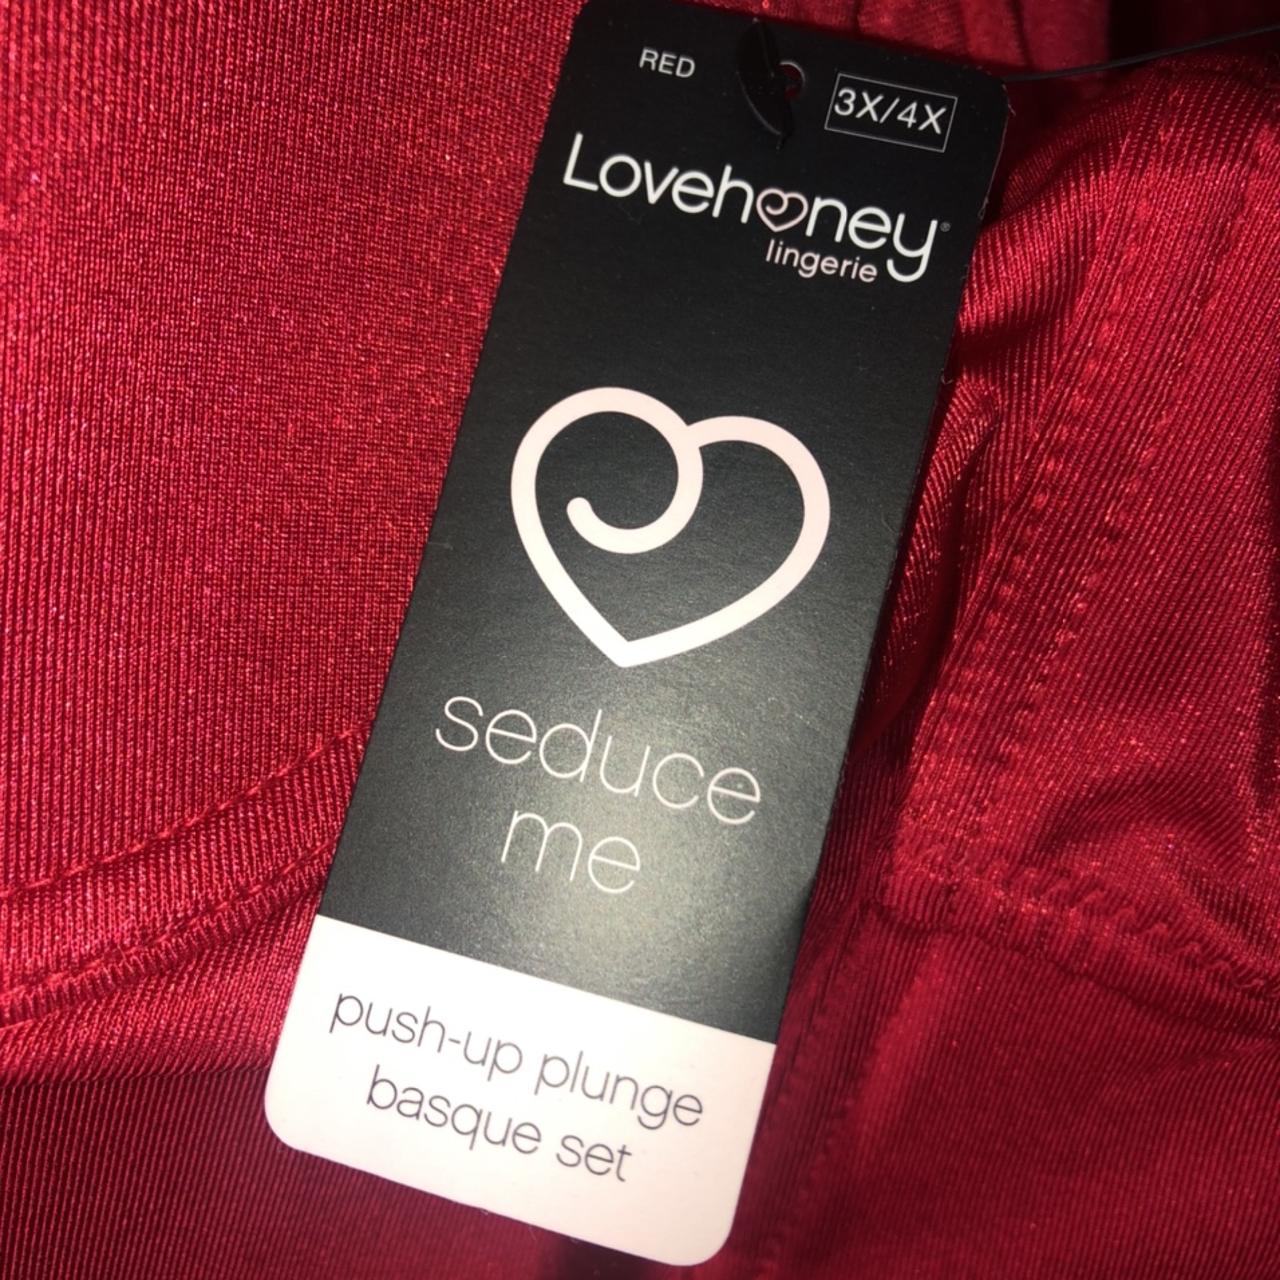 Lovehoney red lace push-up Basque. Size 3x-4x. - Depop